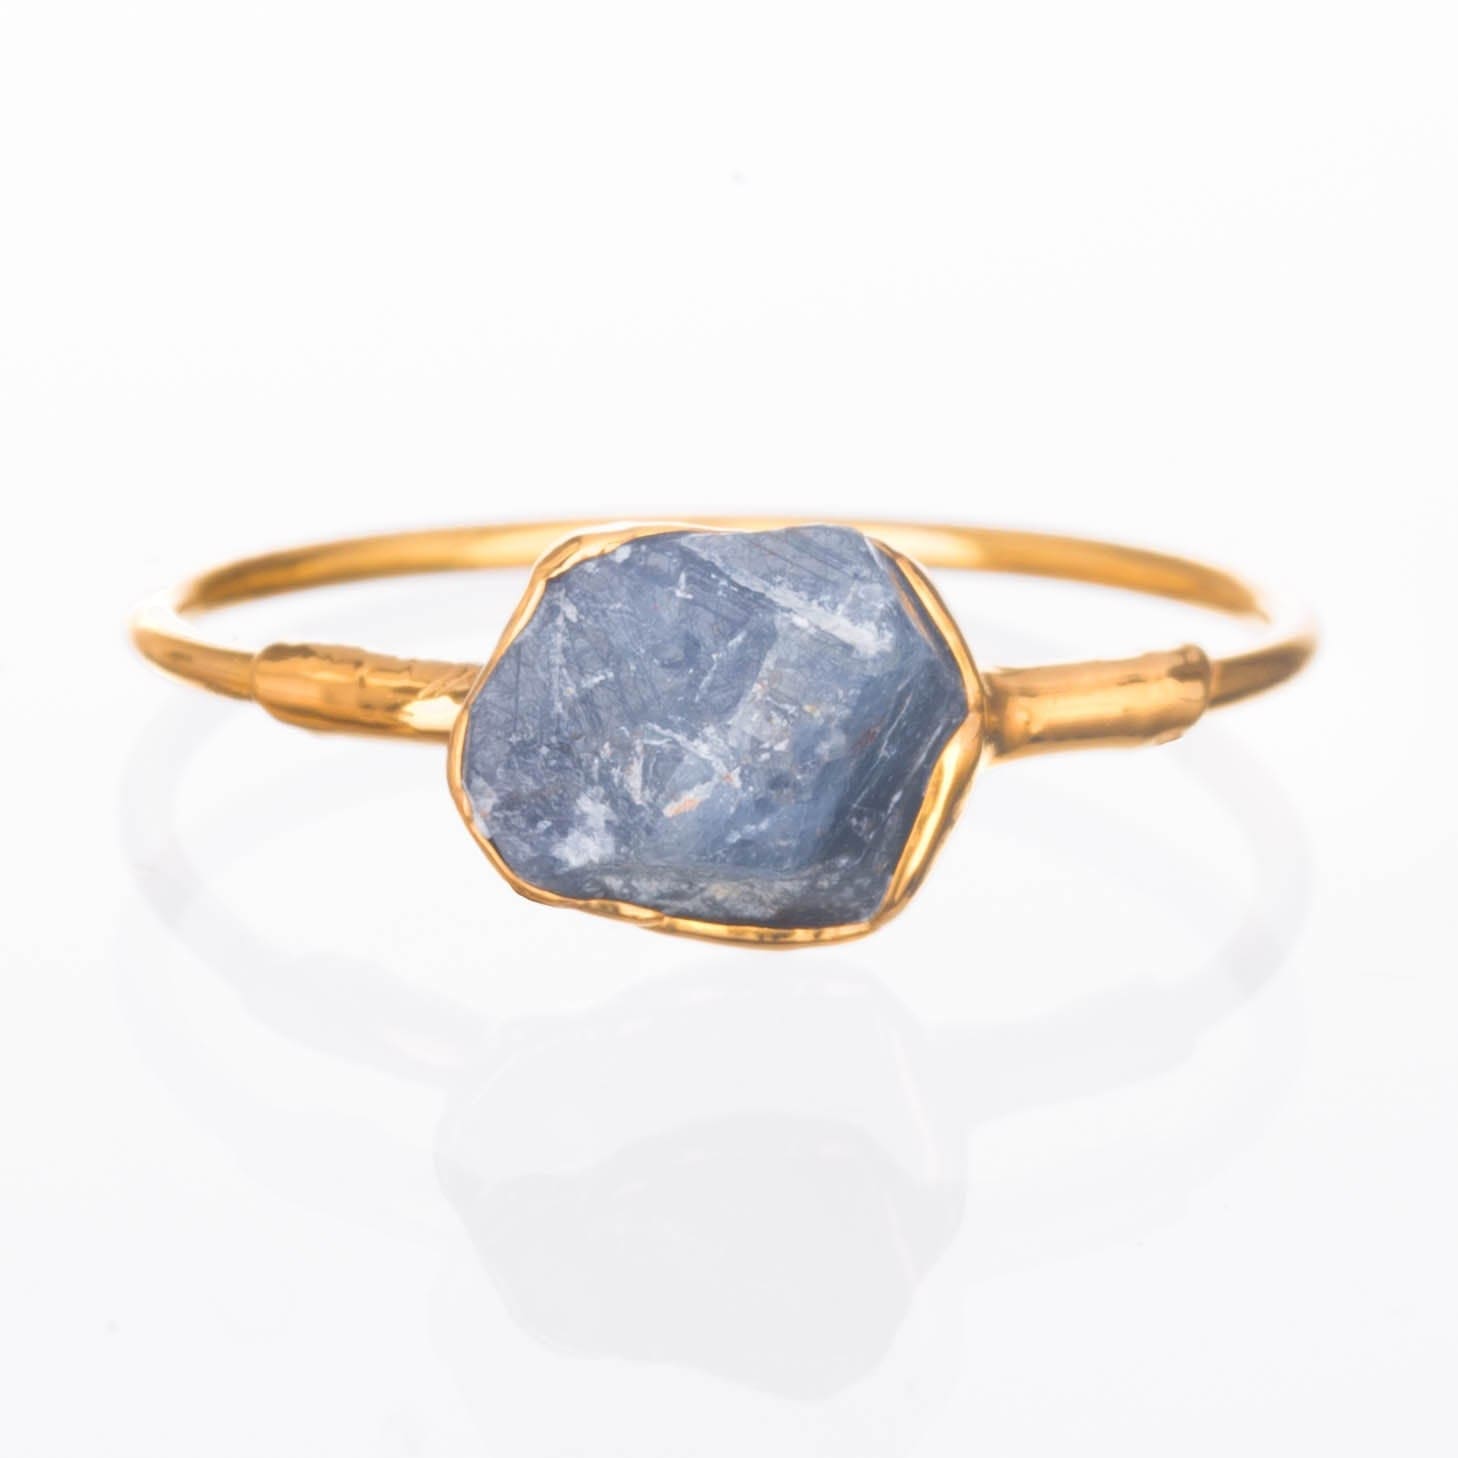 Raw Sapphire Ring in Sterling Silver Gemstone Jewelry Rough